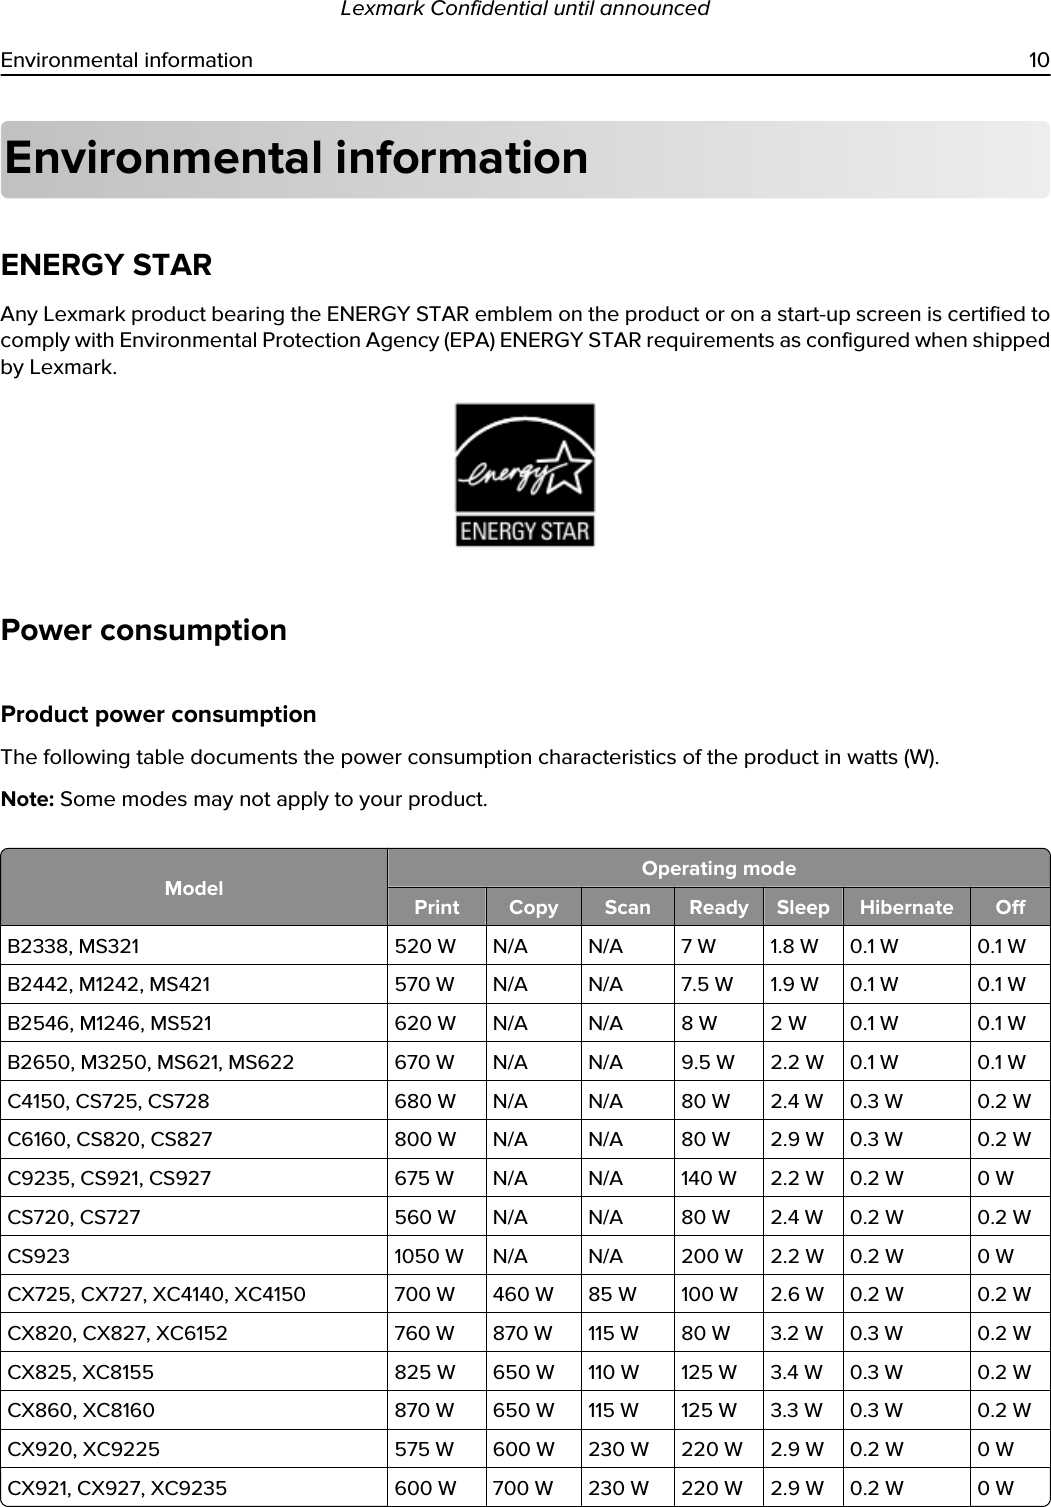 Environmental informationENERGY STARAny Lexmark product bearing the ENERGY STAR emblem on the product or on a start-up screen is certified to comply with Environmental Protection Agency (EPA) ENERGY STAR requirements as configured when shipped by Lexmark.Power consumptionProduct power consumptionThe following table documents the power consumption characteristics of the product in watts (W).Note: Some modes may not apply to your product.Model Operating modePrint Copy Scan Ready Sleep Hibernate OffB2338, MS321 520 W N/A N/A 7 W 1.8 W 0.1 W 0.1 WB2442, M1242, MS421 570 W N/A N/A 7.5 W 1.9 W 0.1 W 0.1 WB2546, M1246, MS521 620 W N/A N/A 8 W 2 W 0.1 W 0.1 WB2650, M3250, MS621, MS622 670 W N/A N/A 9.5 W 2.2 W 0.1 W 0.1 WC4150, CS725, CS728 680 W N/A N/A 80 W 2.4 W 0.3 W 0.2 WC6160, CS820, CS827 800 W N/A N/A 80 W 2.9 W 0.3 W 0.2 WC9235, CS921, CS927 675 W N/A N/A 140 W 2.2 W 0.2 W 0 WCS720, CS727 560 W N/A N/A 80 W 2.4 W 0.2 W 0.2 WCS923 1050 W N/A N/A 200 W 2.2 W 0.2 W 0 WCX725, CX727, XC4140, XC4150 700 W 460 W 85 W 100 W 2.6 W 0.2 W 0.2 WCX820, CX827, XC6152 760 W 870 W 115 W 80 W 3.2 W 0.3 W 0.2 WCX825, XC8155 825 W 650 W 110 W 125 W 3.4 W 0.3 W 0.2 WCX860, XC8160 870 W 650 W 115 W 125 W 3.3 W 0.3 W 0.2 WCX920, XC9225 575 W 600 W 230 W 220 W 2.9 W 0.2 W 0 WCX921, CX927, XC9235 600 W 700 W 230 W 220 W 2.9 W 0.2 W 0 WLexmark Confidential until announcedEnvironmental information 10